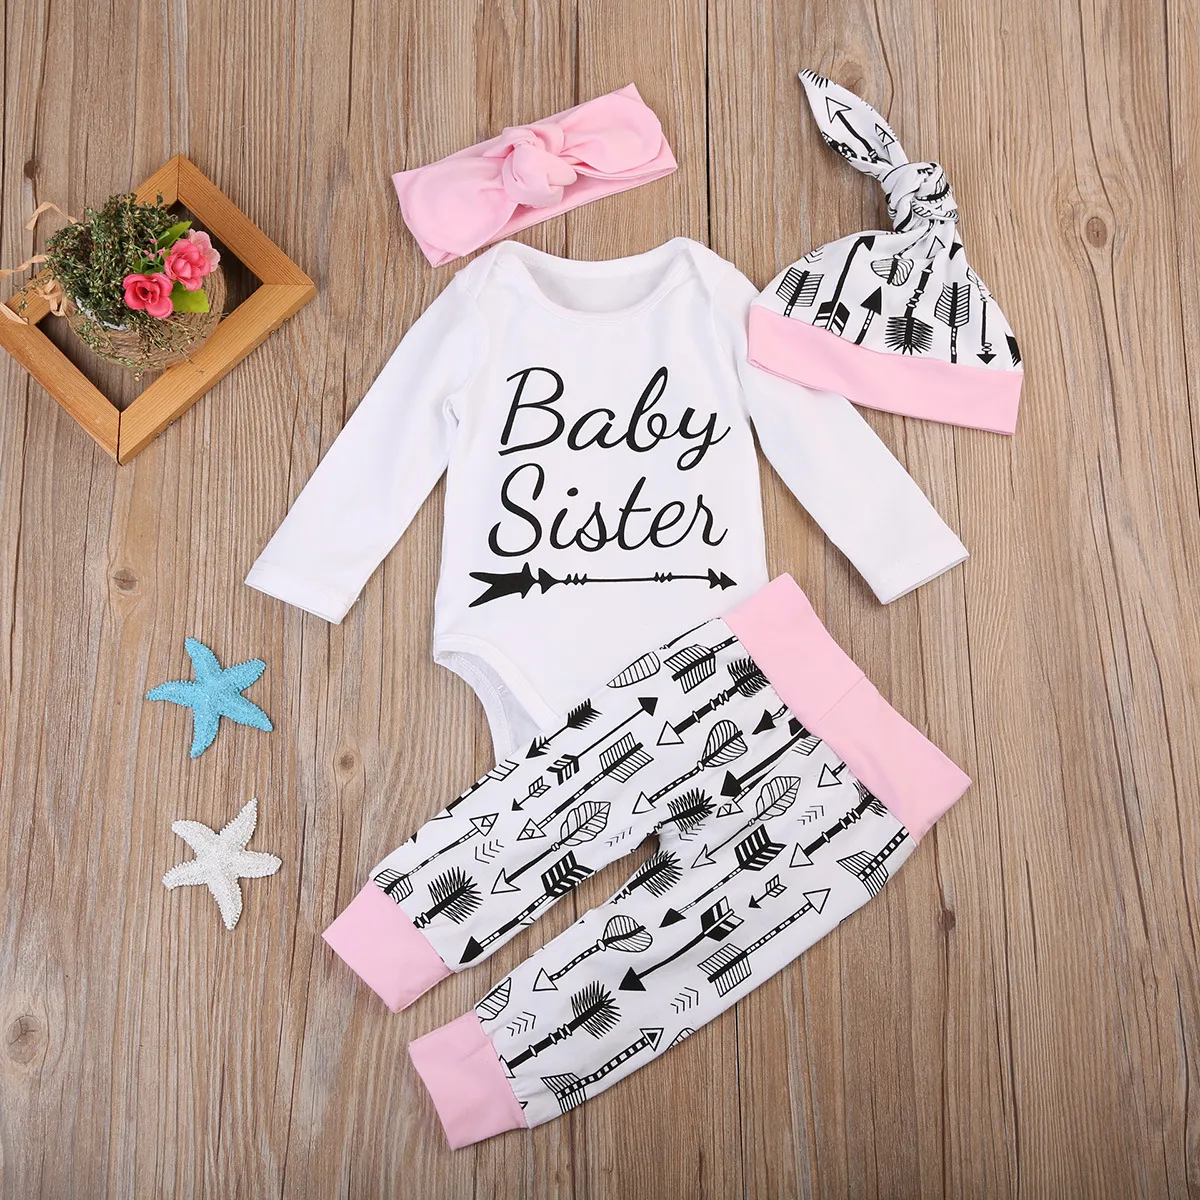 Newborn Baby Girls Clothes Cotton Outfits Baby Sister Letter Romper+Arrow Pants +Hairband+Hat 4Pcs Baby Girls Clothes Set Infant Outfit